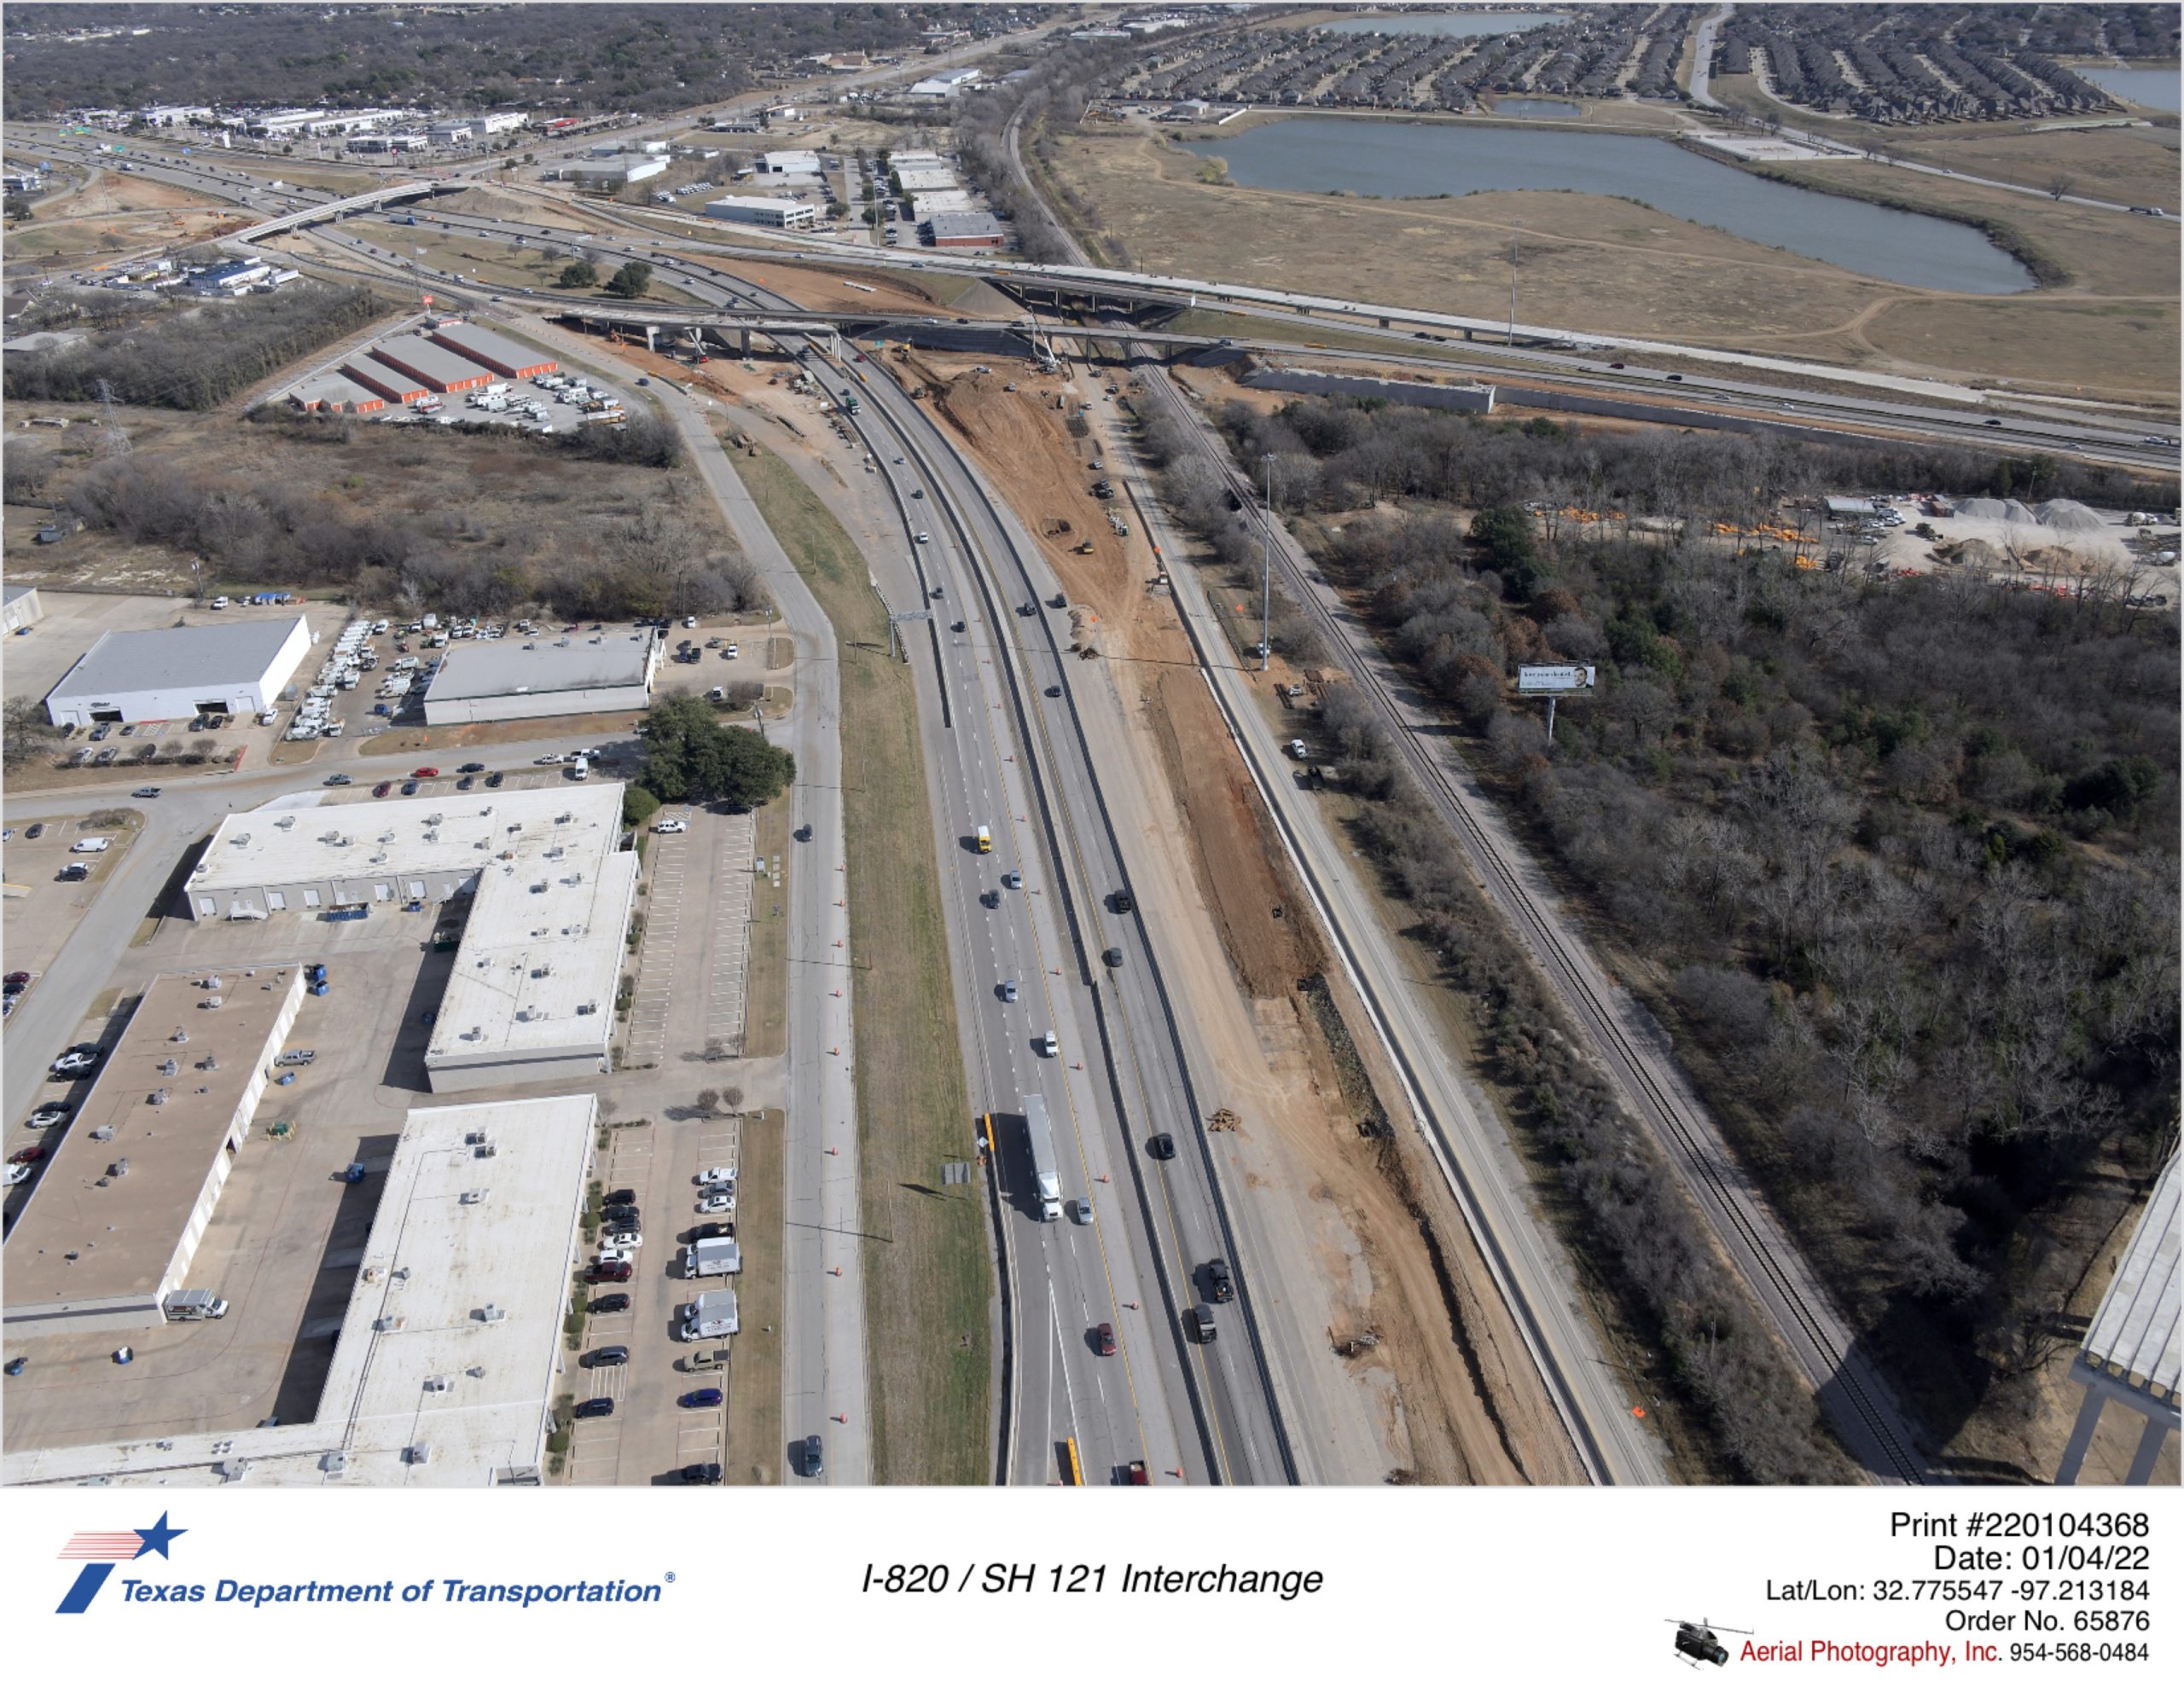 SH 121 looking northeast at I-820/SH 121 interchange. Construction of new I-820 bridges over SH 121 and Trinity Rail Express shown.